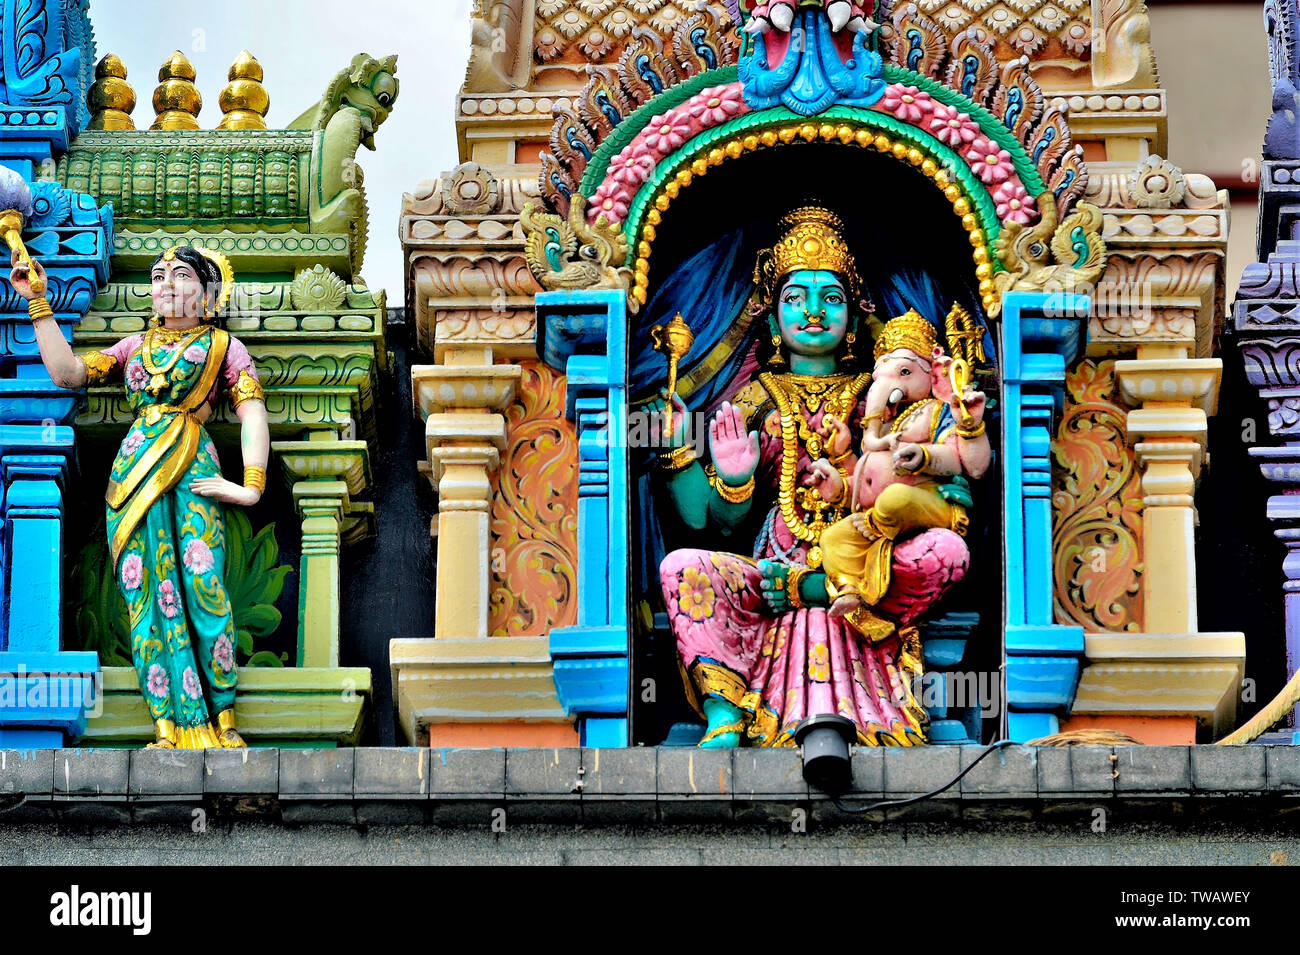 Colourful statues of Hindu religious deities adorning the entrance of famous Hindu temple in Little India, Singapore in close up Stock Photo